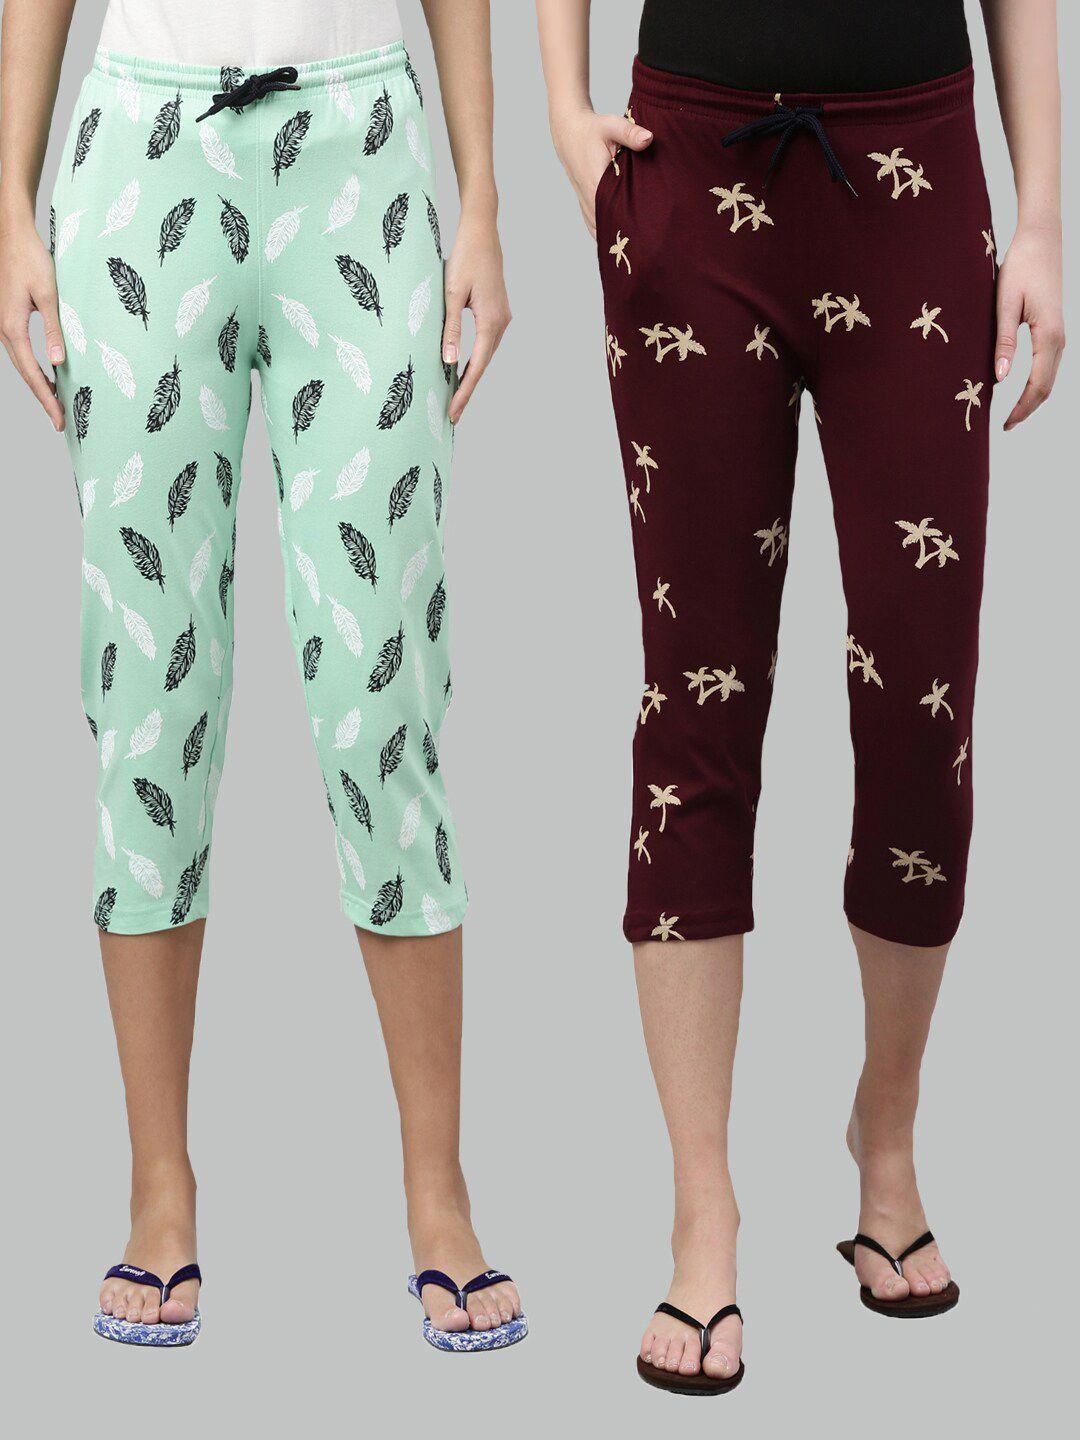 kryptic-women-pack-of-2-green-&-maroon-printed-pure-cotton-capris